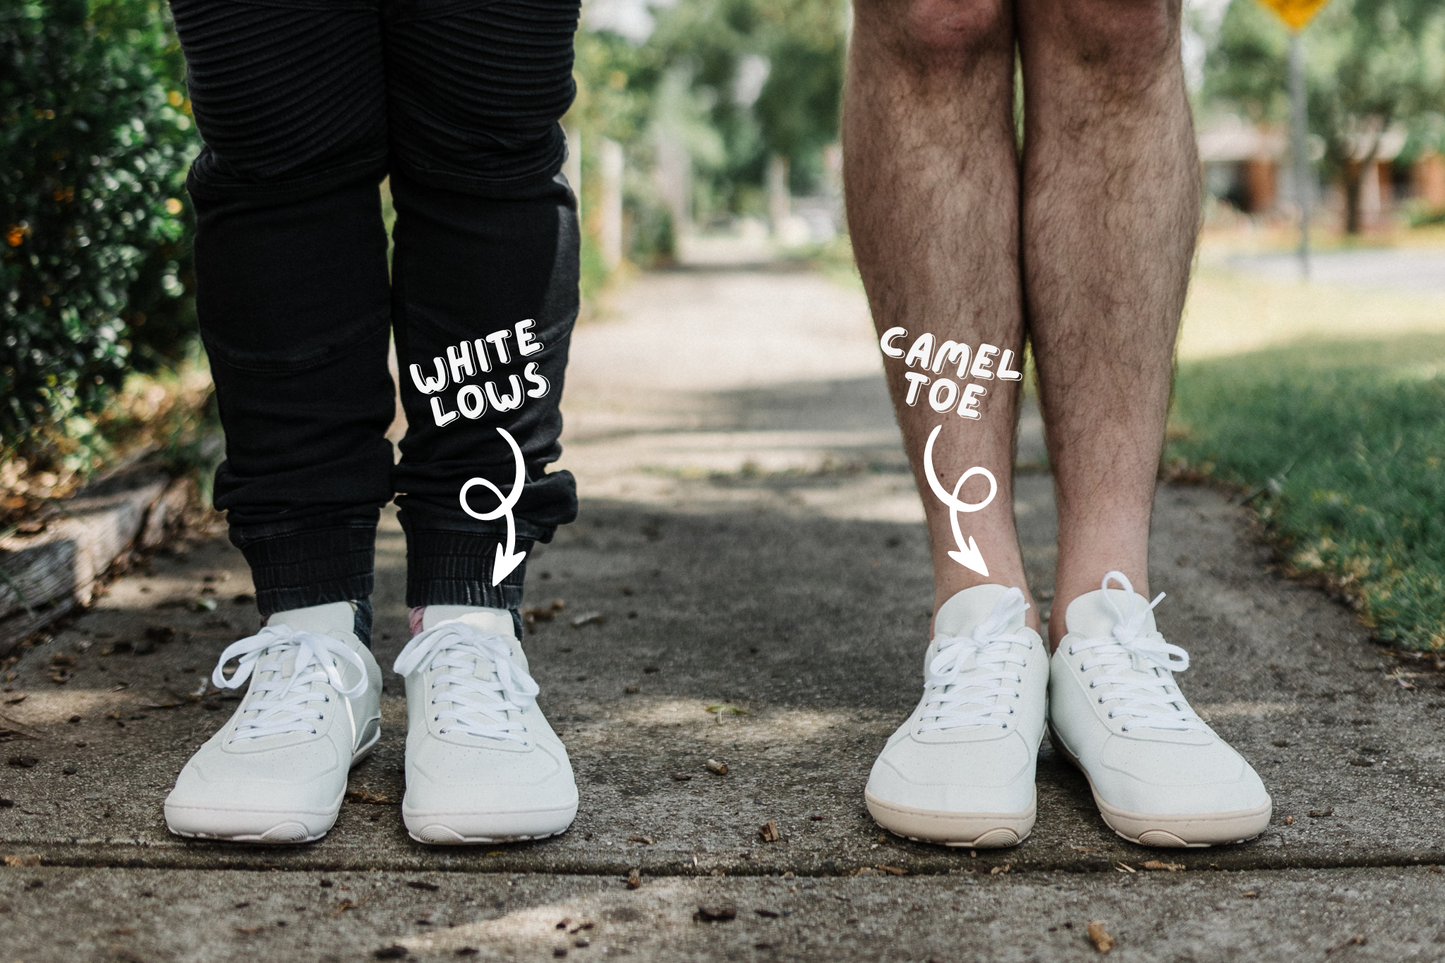 WHITE LOWS AND CAMEL TOE FRONT COMPARISON